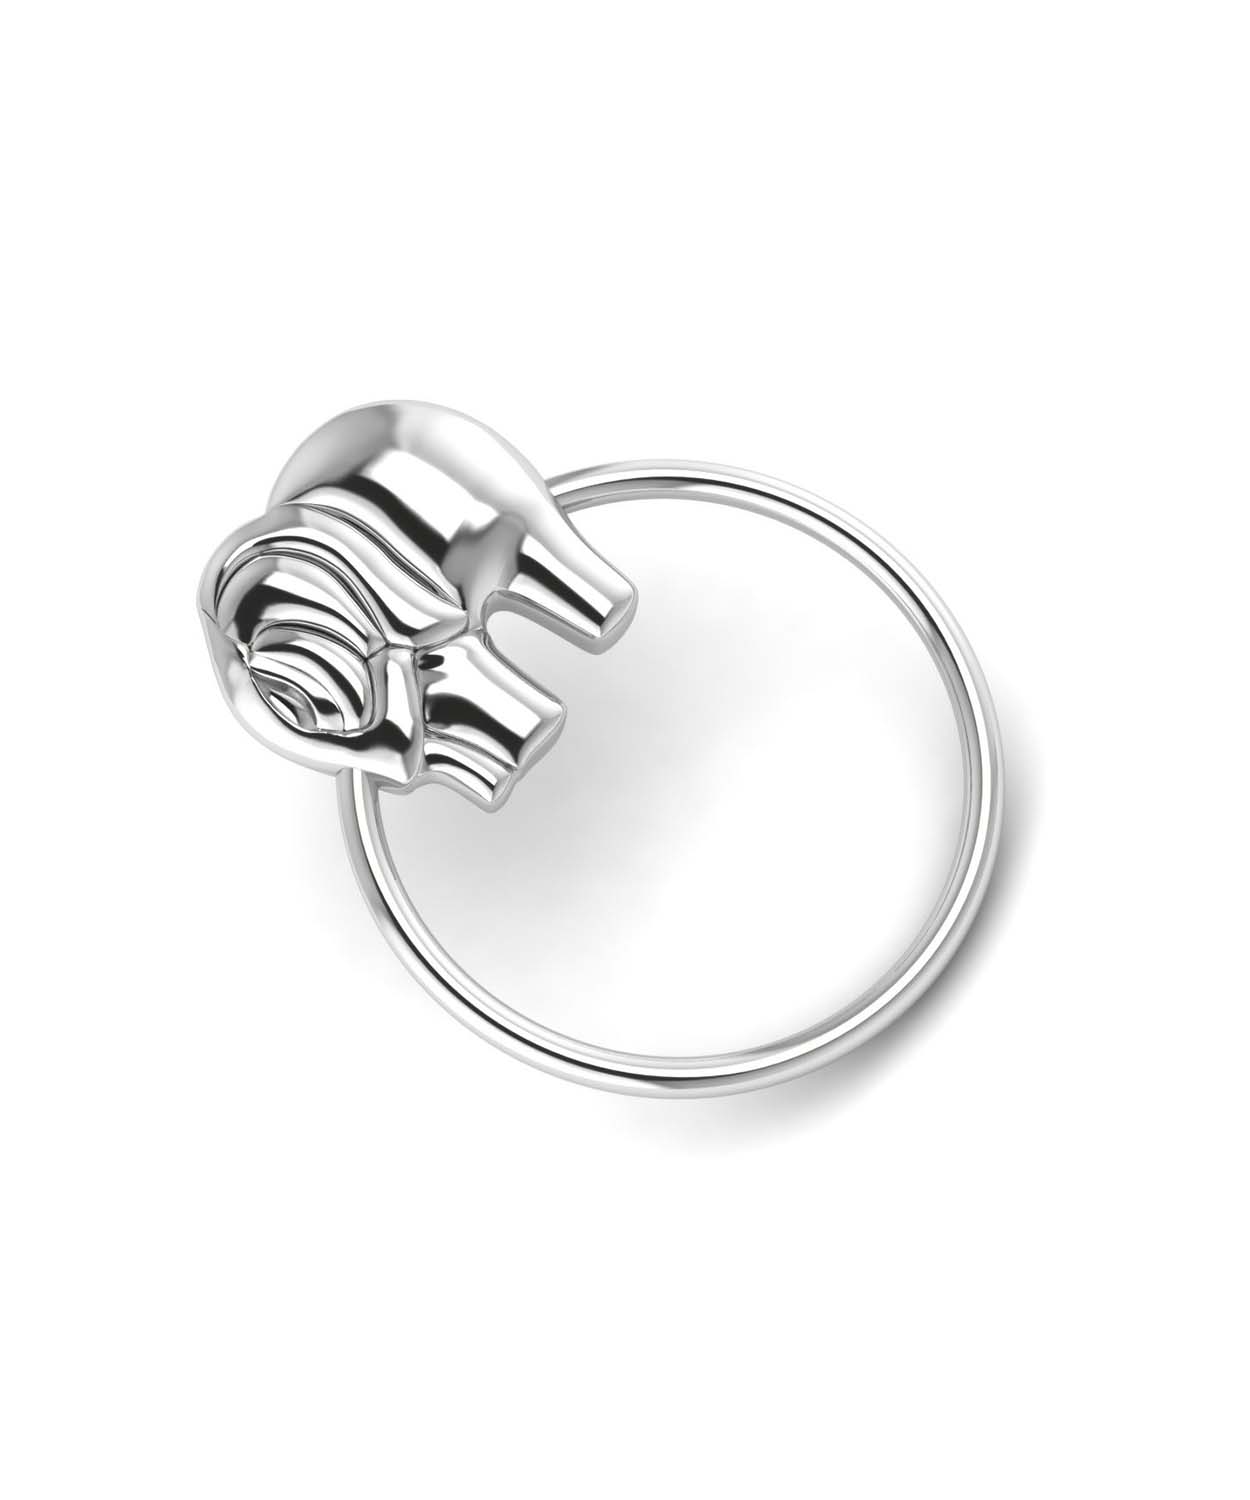 Sterling Silver Elephant Ring Baby Rattle (20 gm)